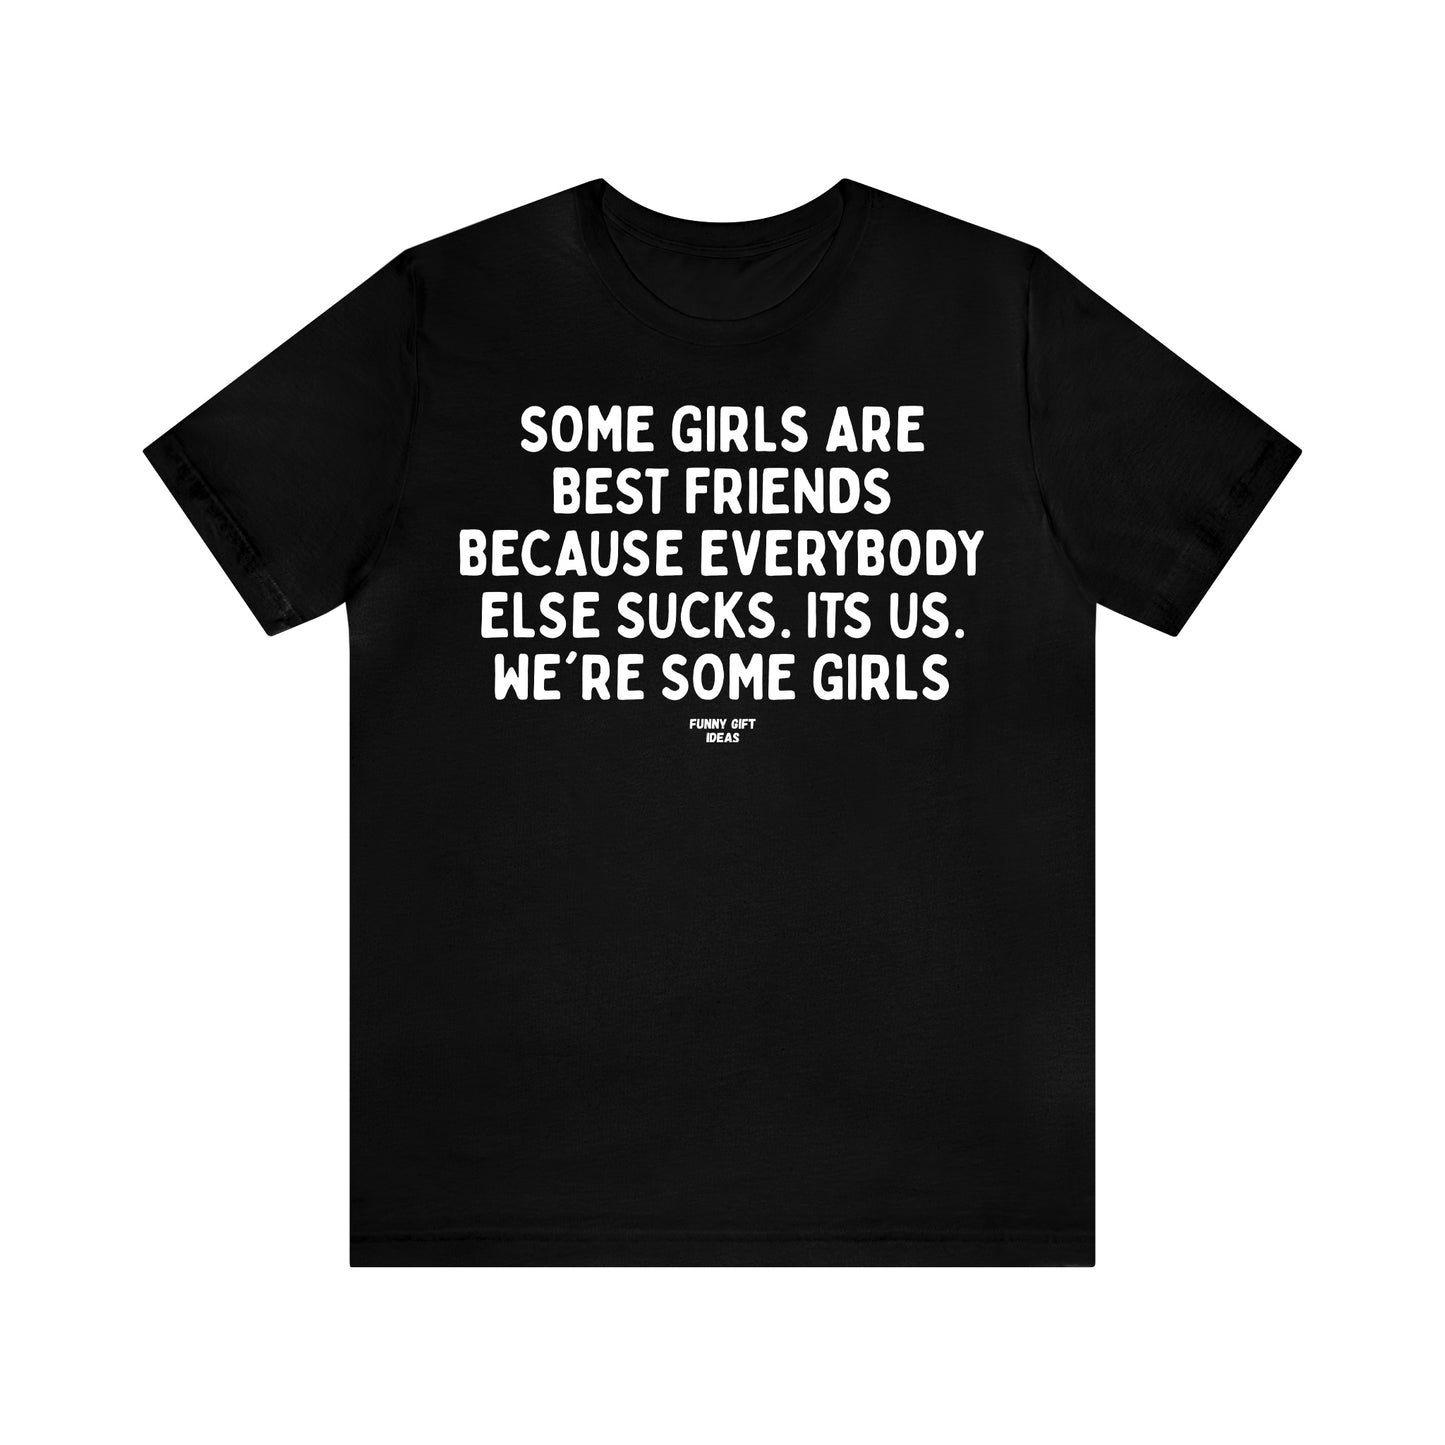 Funny Shirts for Women - Some Girls Are Best Friends Because Everybody Else Sucks. Its Us. We're Some Girls - Women's T Shirts